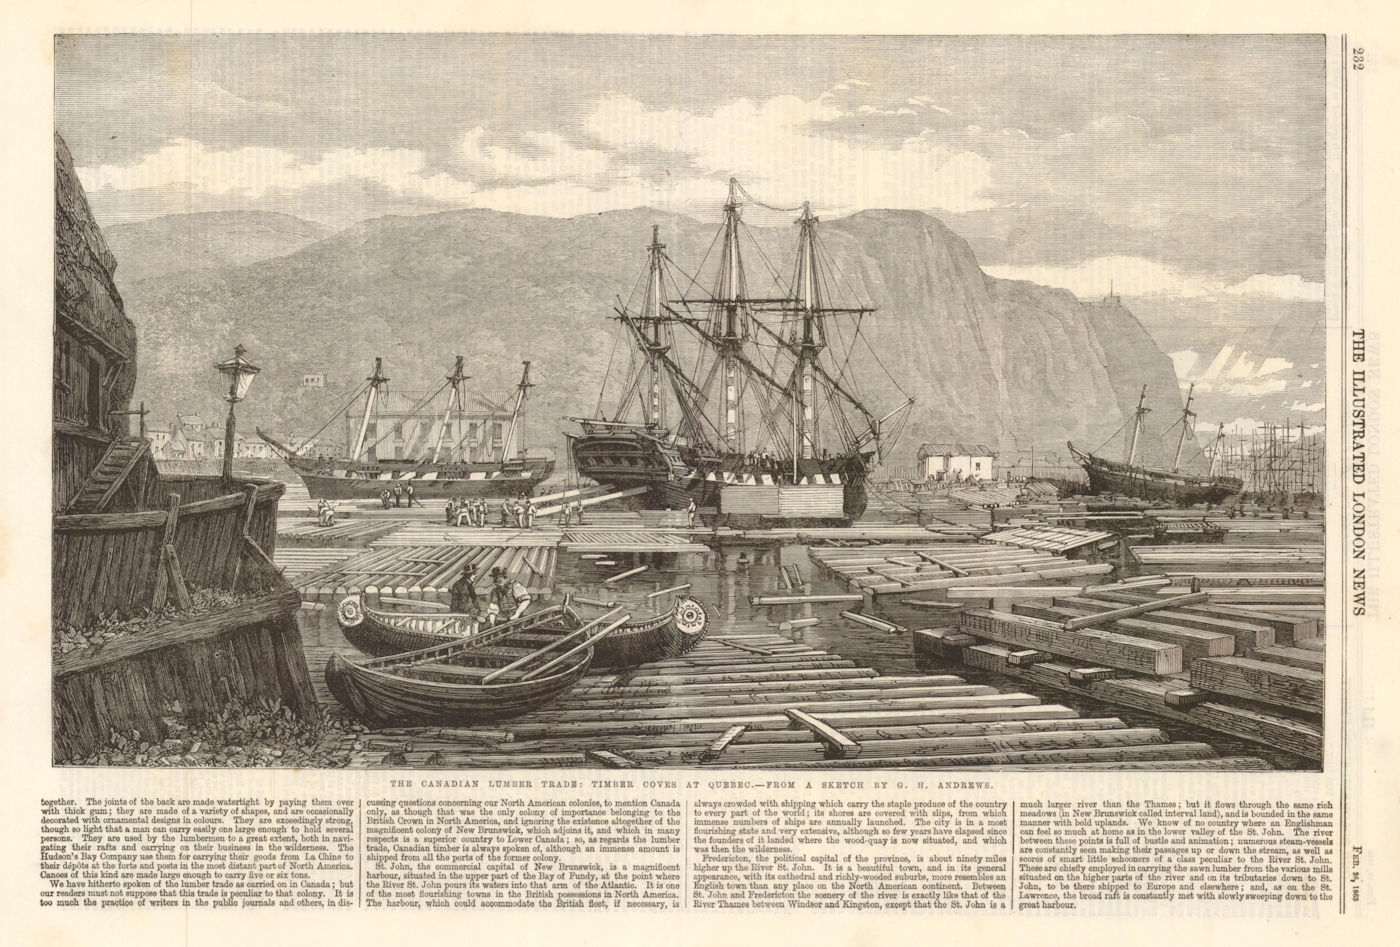 Associate Product The Canadian Lumber trade: Timber coves at Quebec. Canada 1863 old print